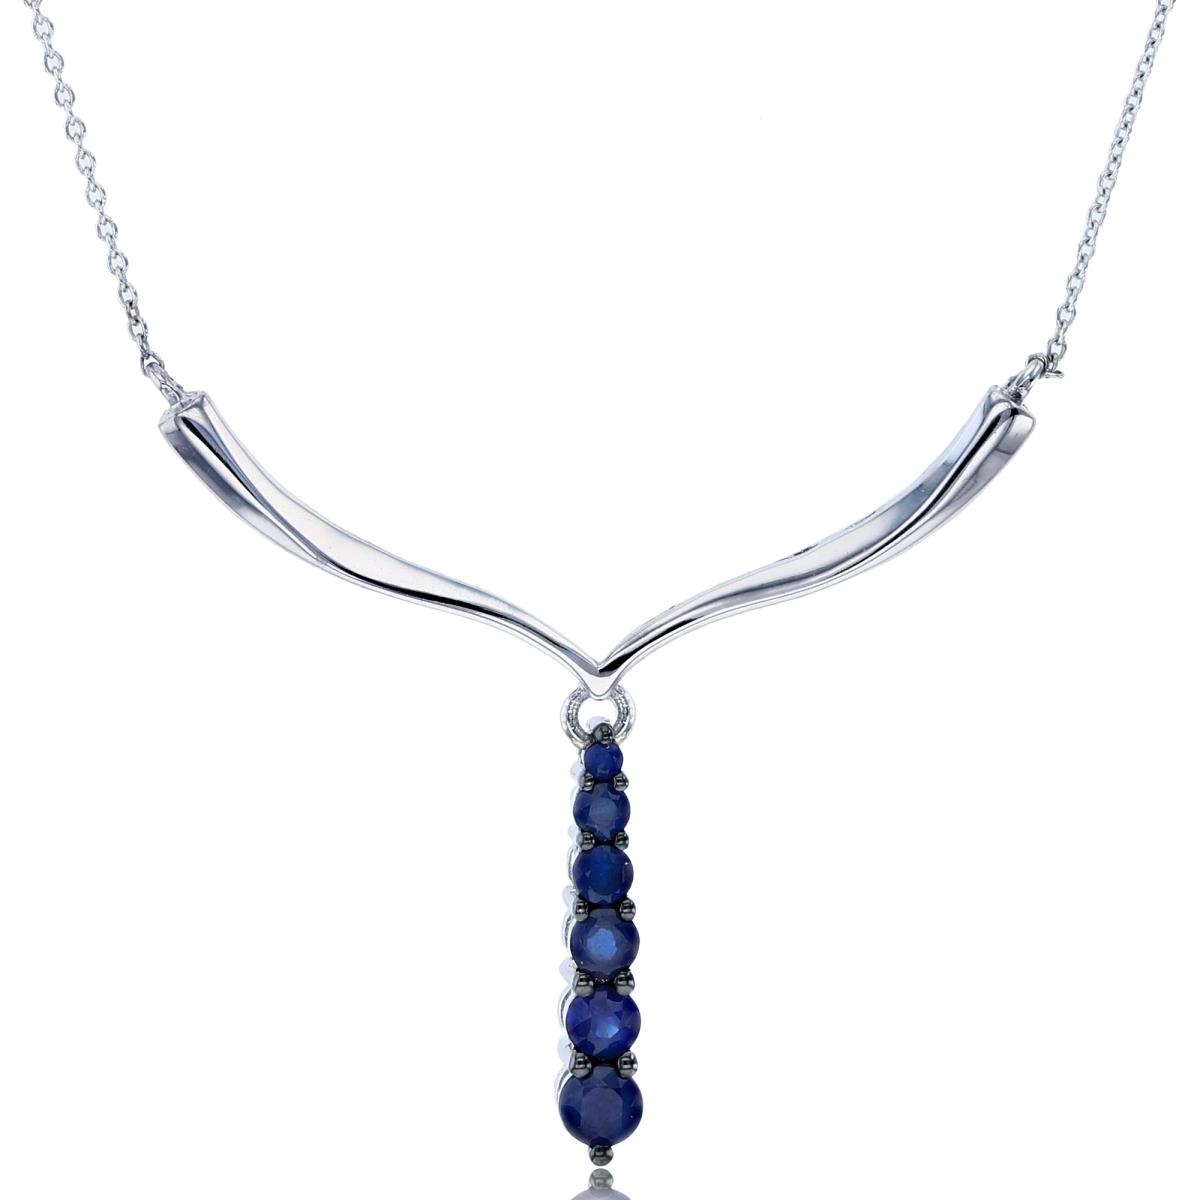 10K Gold White & Ct. Rd Blue Sapphire Graduated Bar "Y"18"Necklace